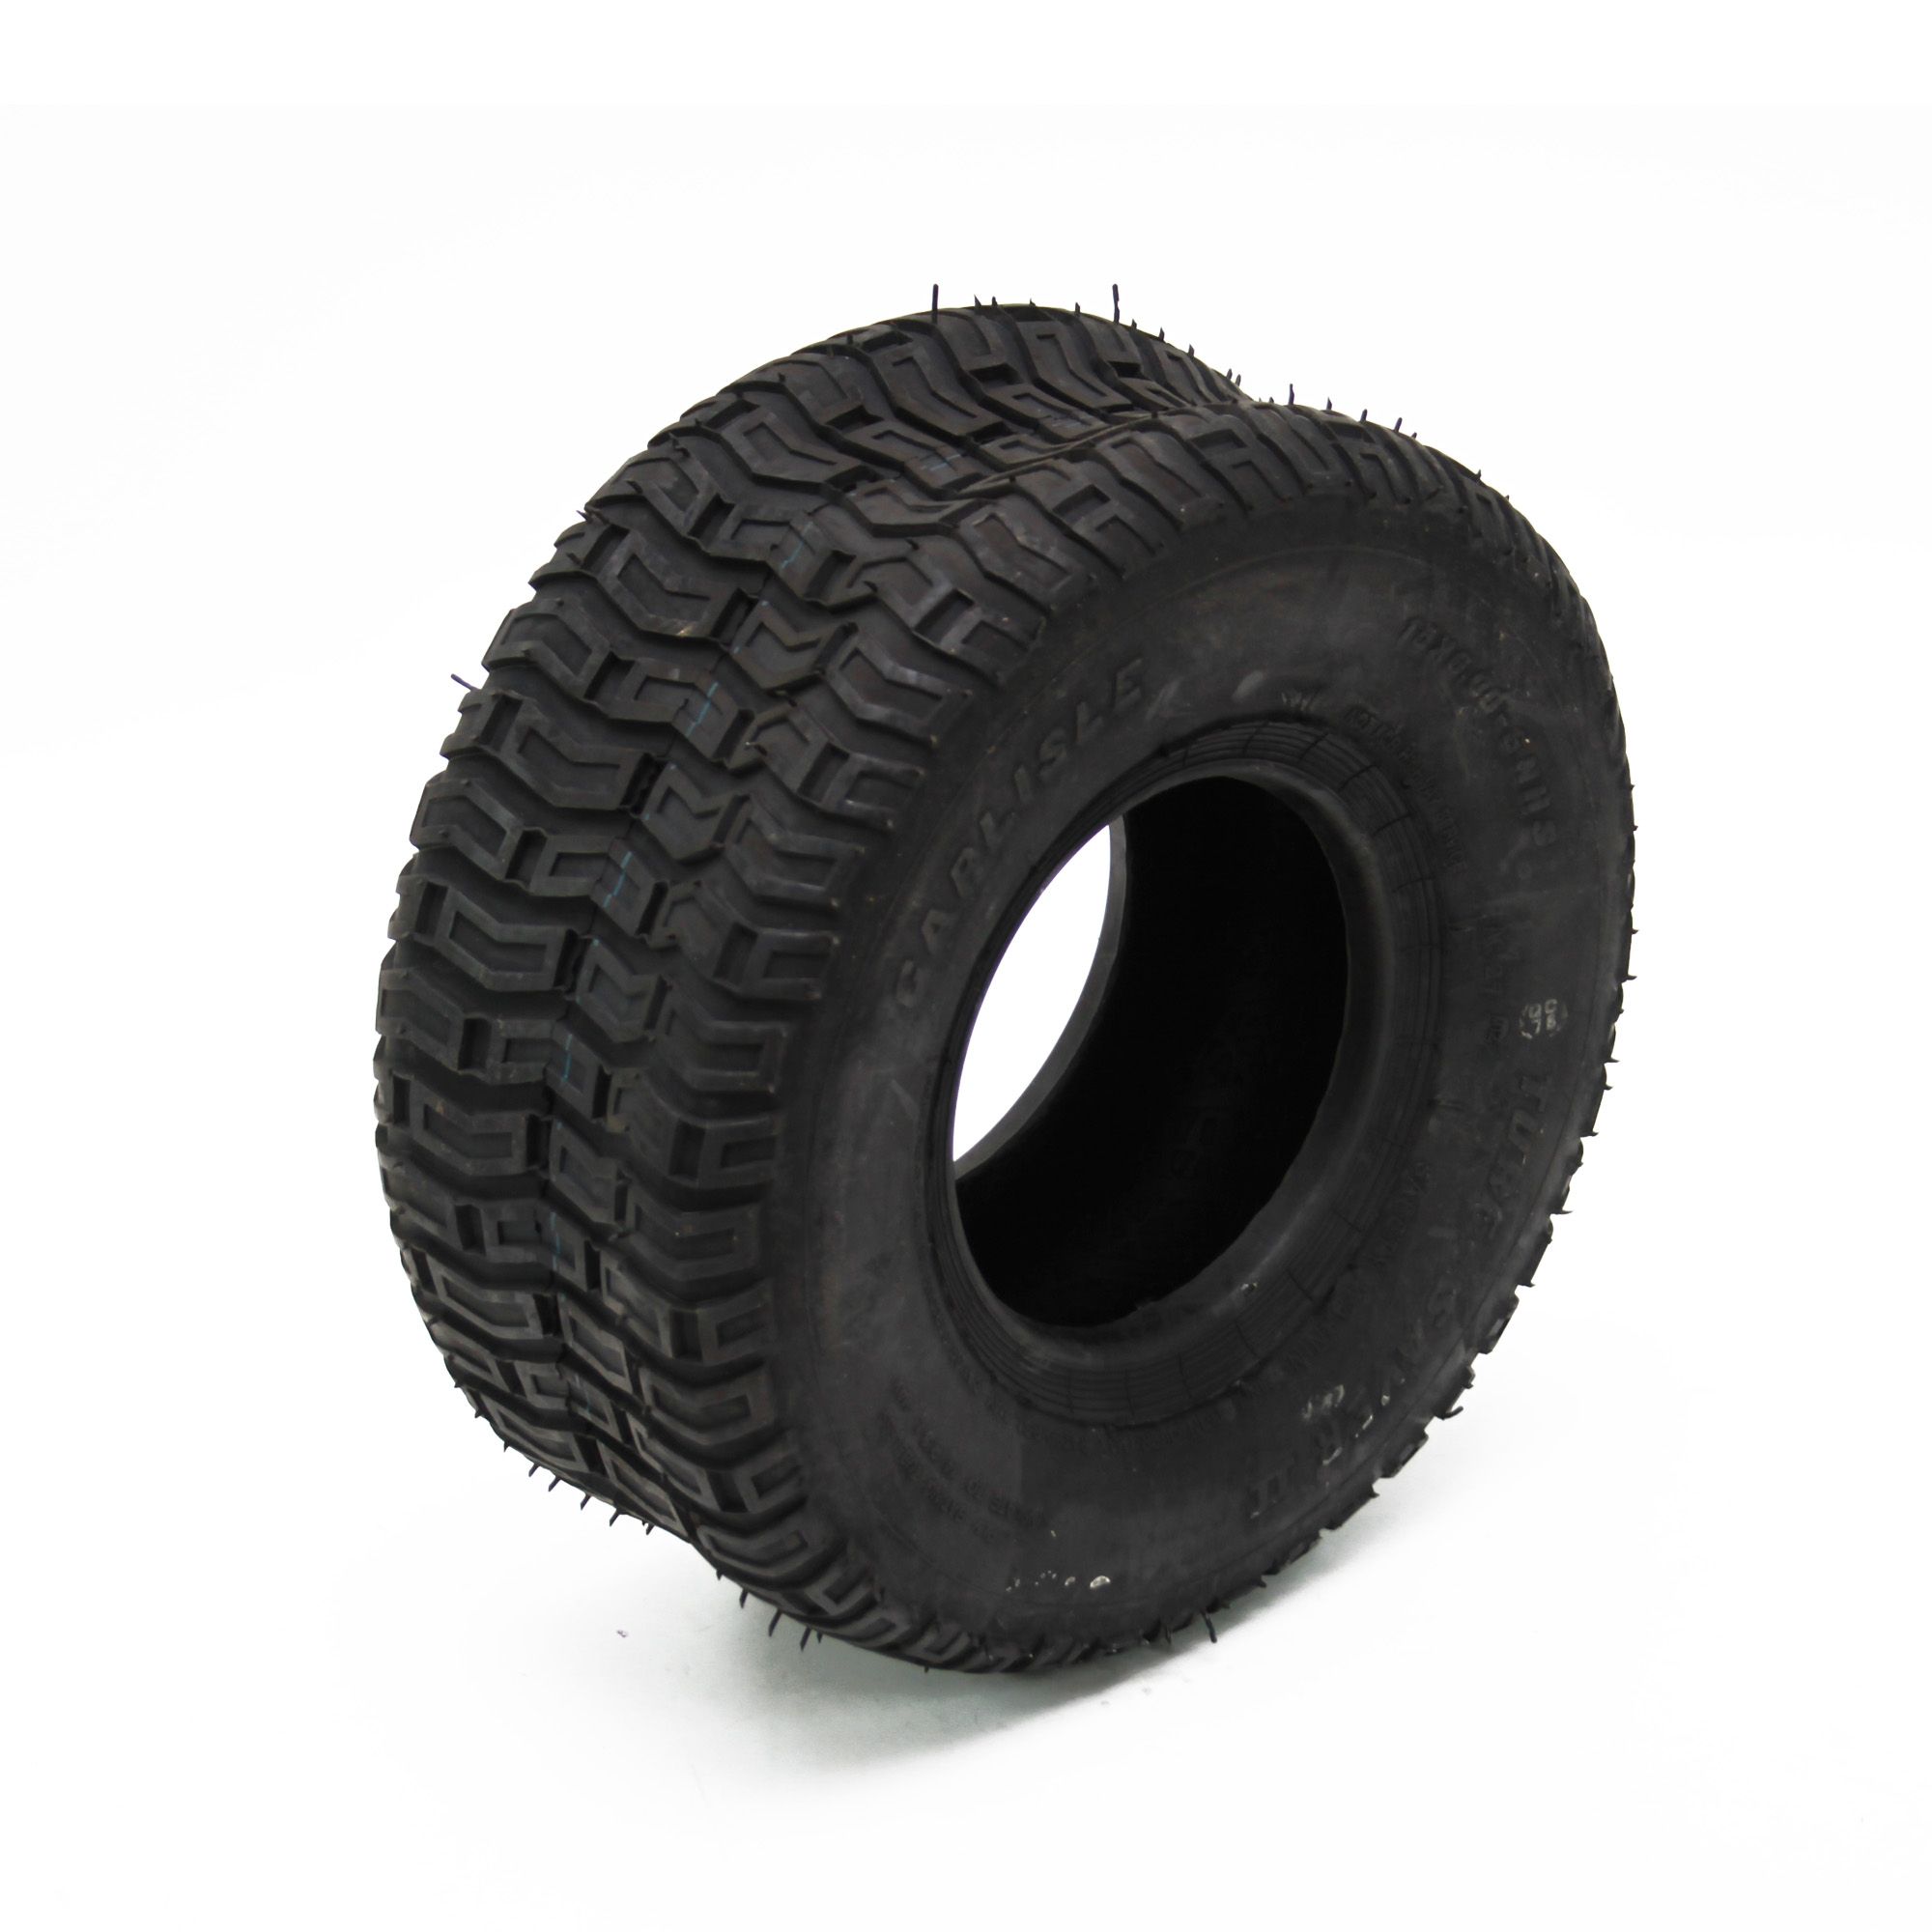 Riding Mower Tire | vlr.eng.br